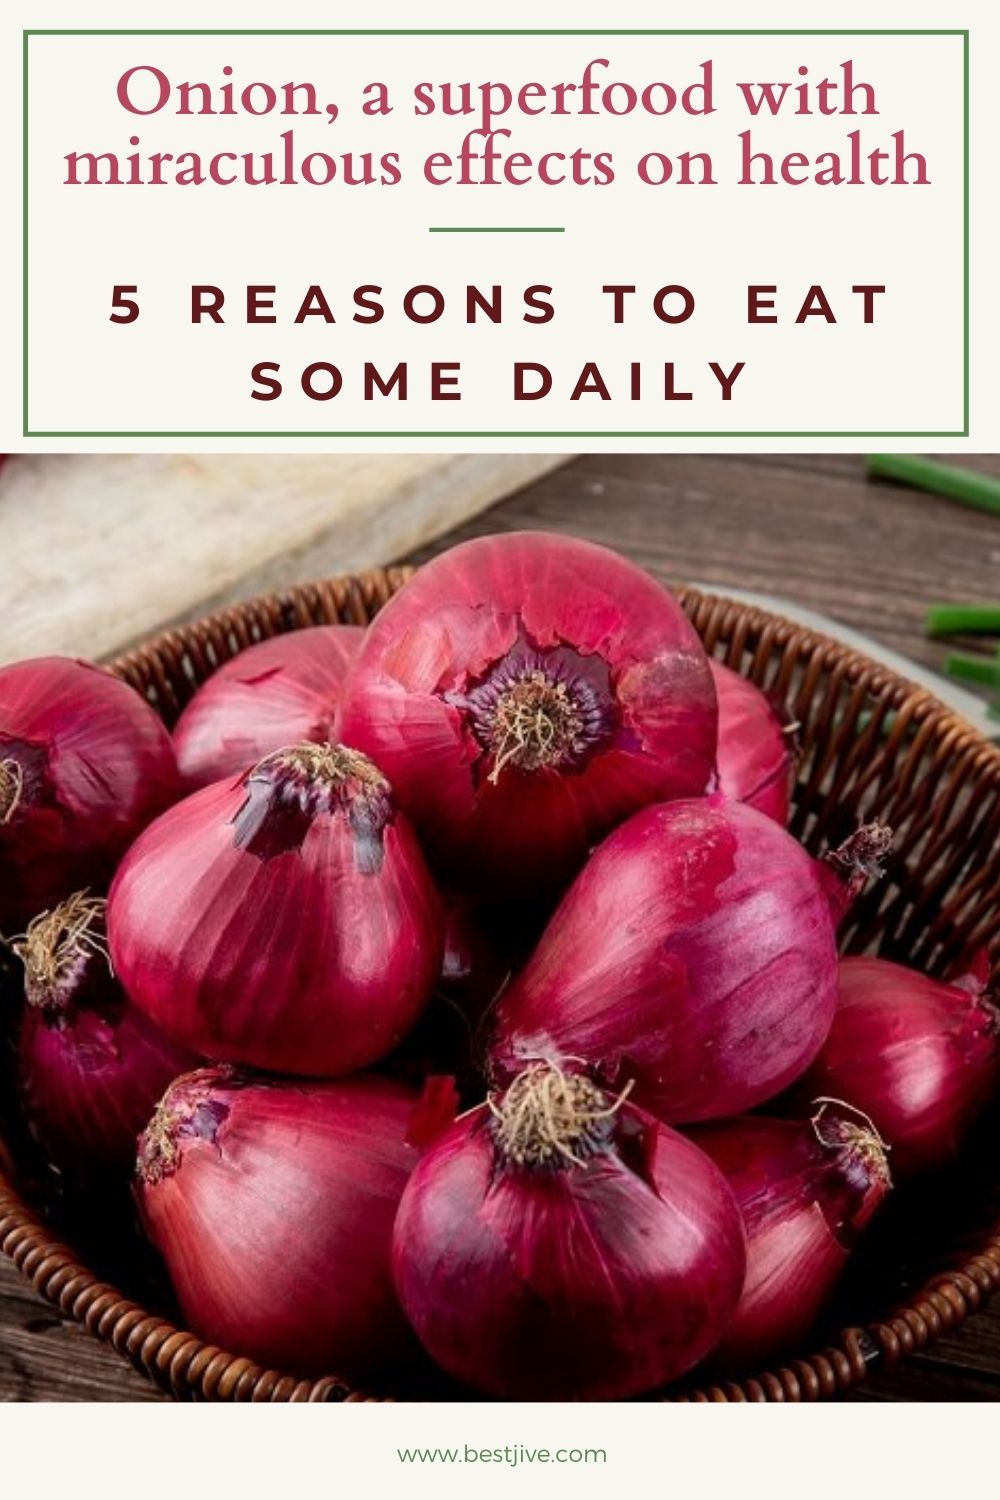 Onion, a superfood with miraculous effects on health - 5 reasons to eat some daily